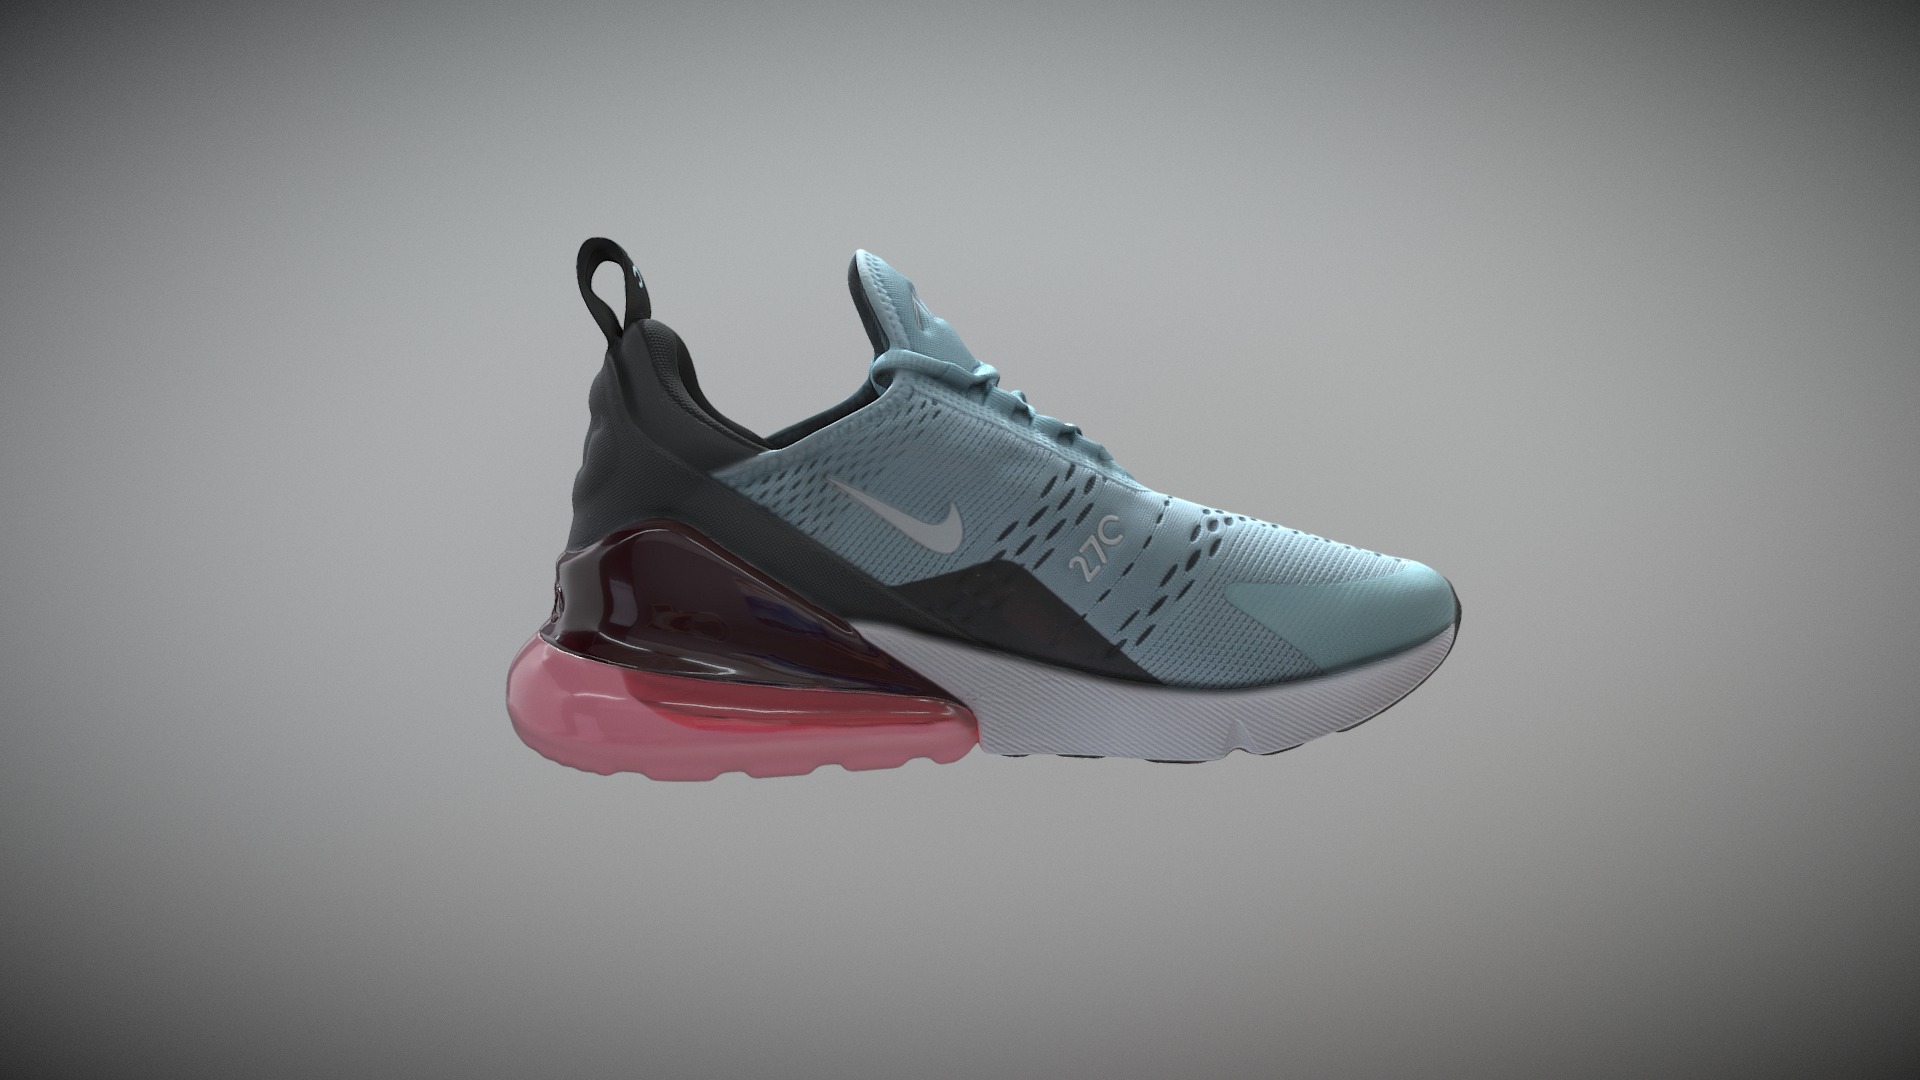 3D model Nike AirMax year 2018 - This is a 3D model of the Nike AirMax year 2018. The 3D model is about a shoe on a white background.